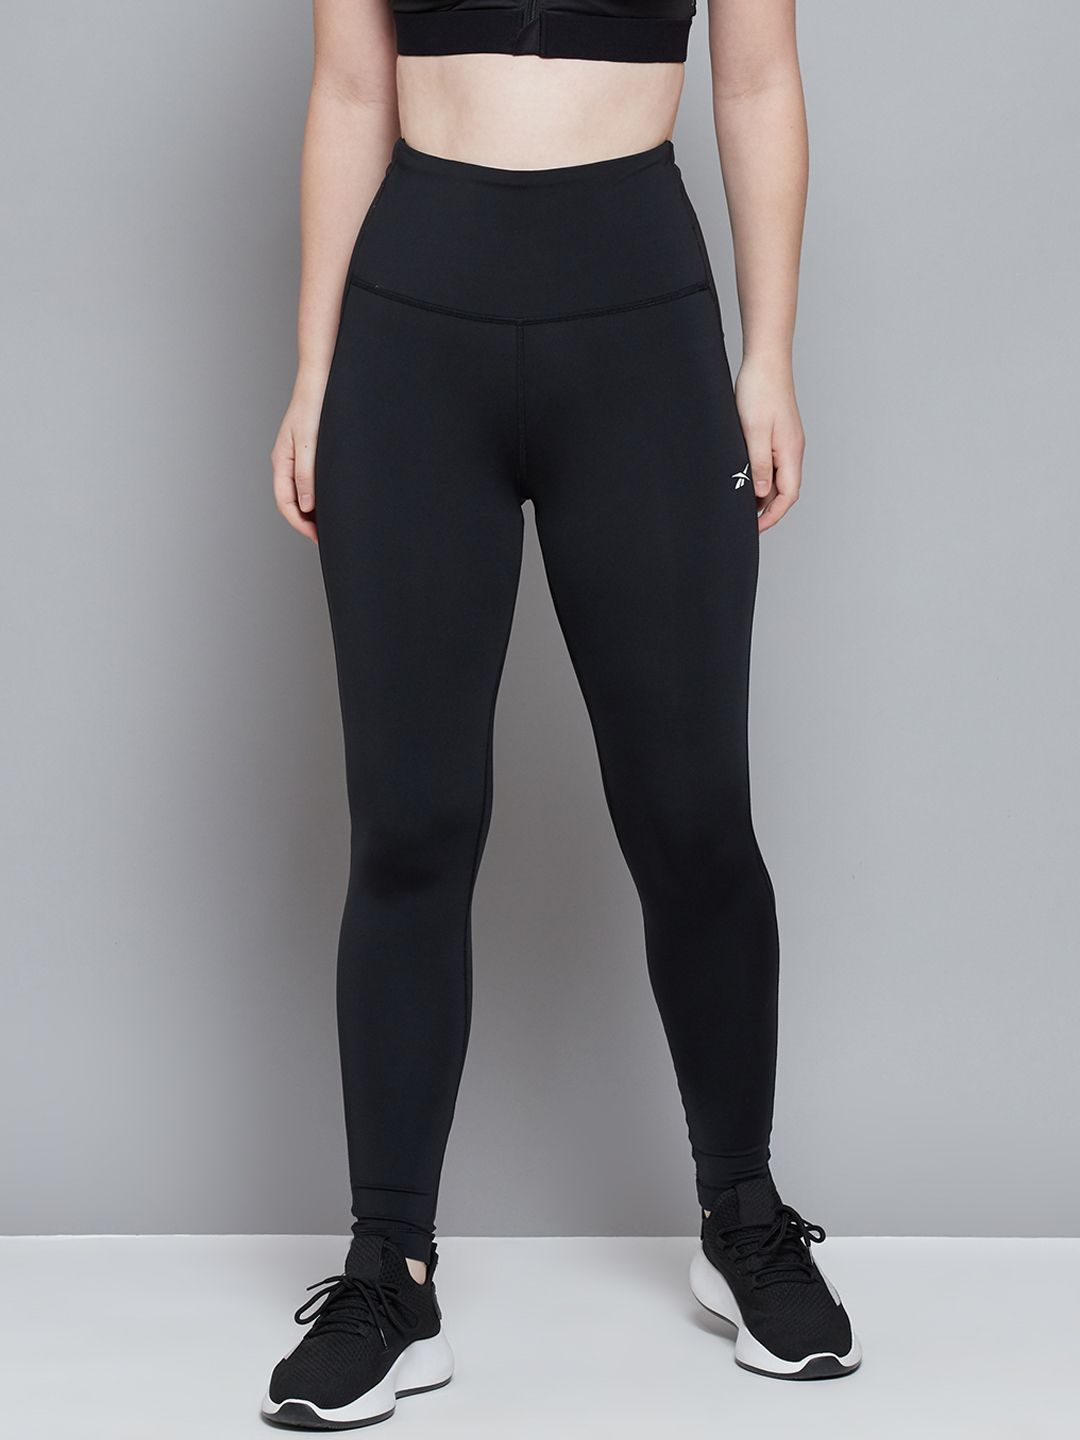 Reebok Women Black Solid Compression Fit Speedwick Lux High-Rise Perform Tights Price in India